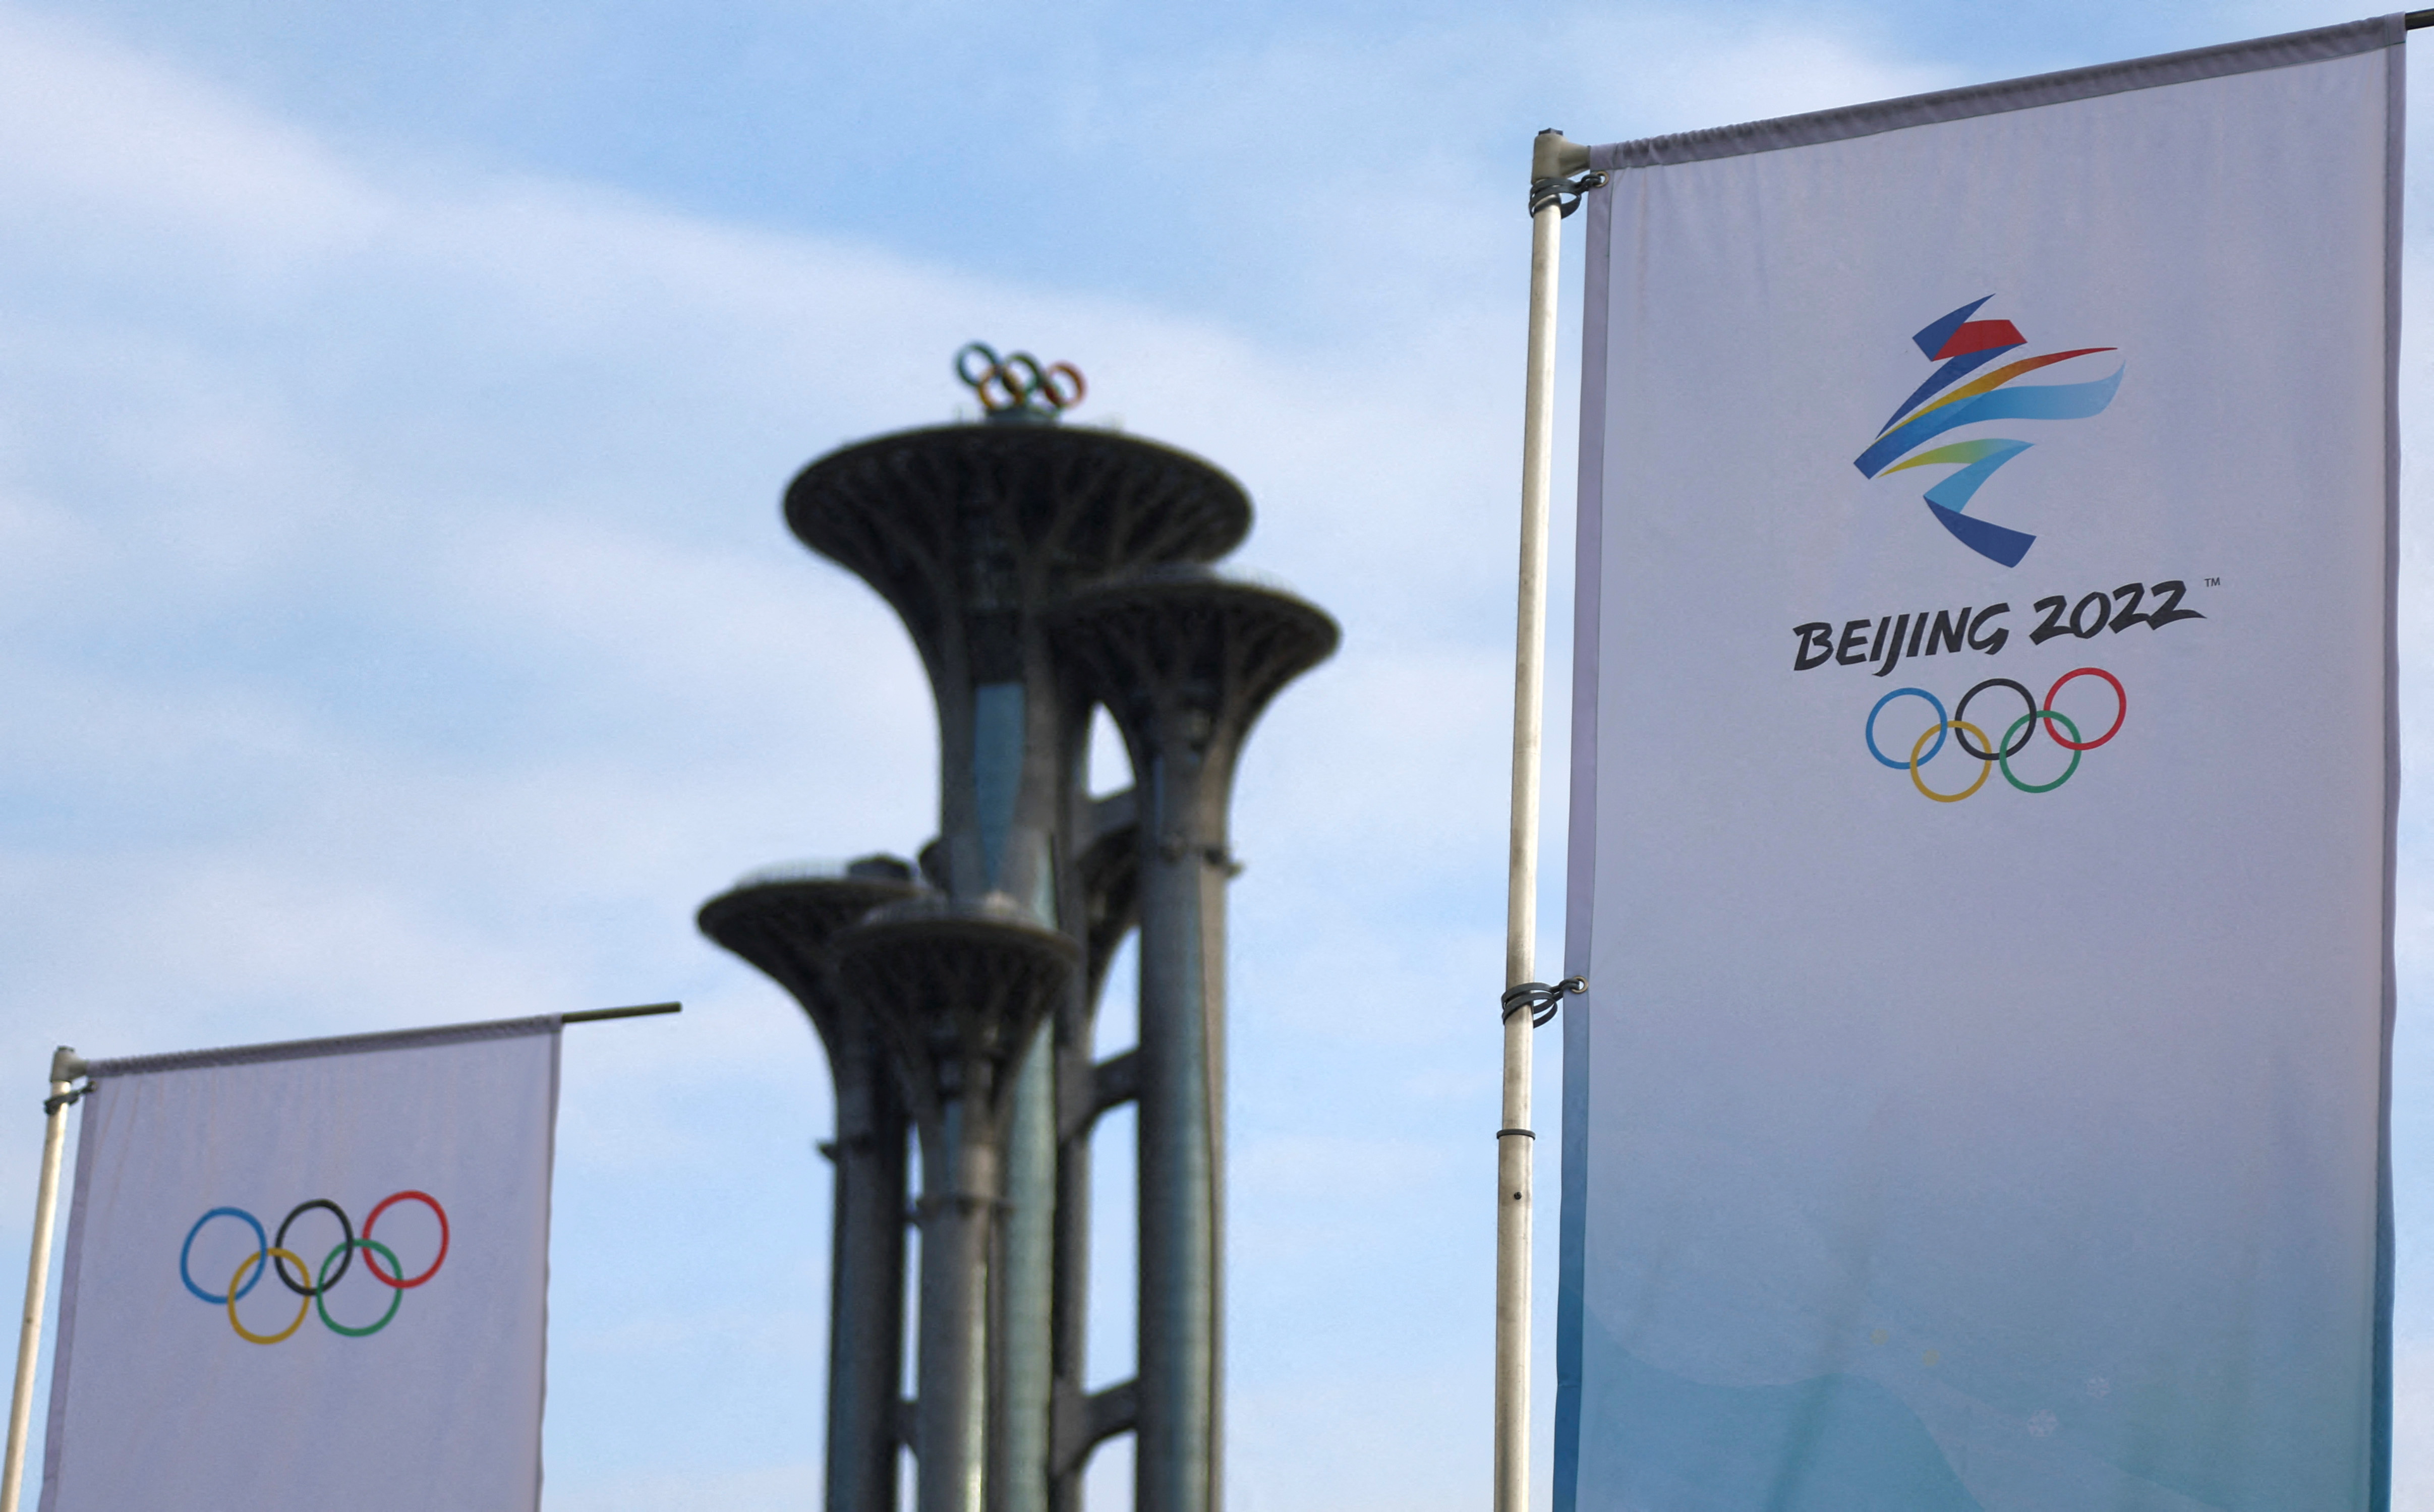 The Beijing Olympic Tower is pictured ahead of the Beijing 2022 Winter Olympics in Beijing